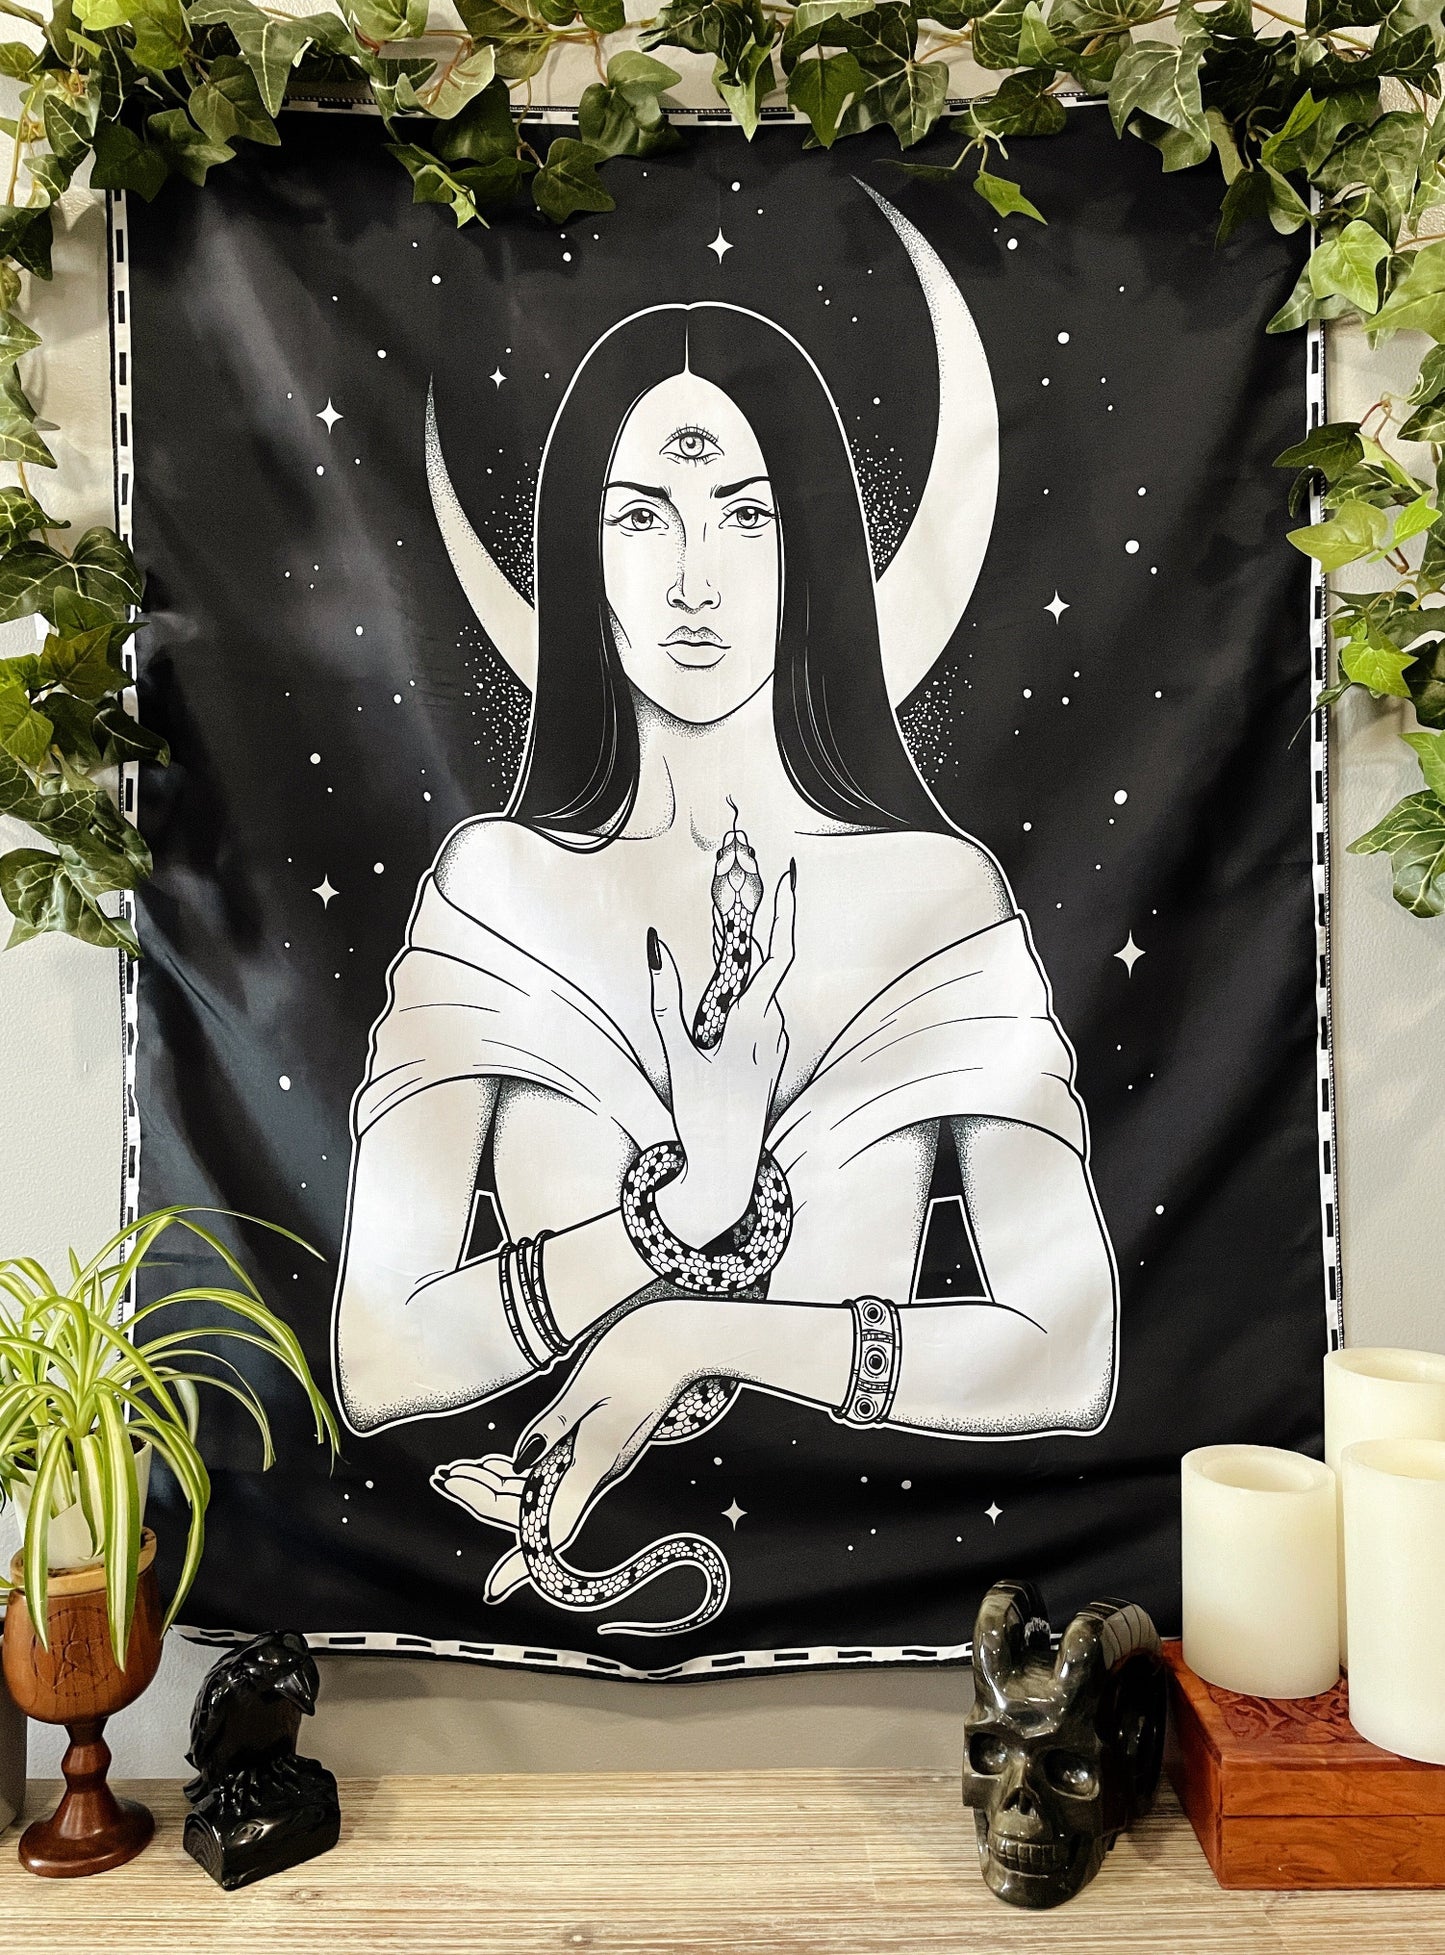 Pictured is a large wall tapestry with a black background and a woman holding a snake with a crescent moon behind her printed in white on it.